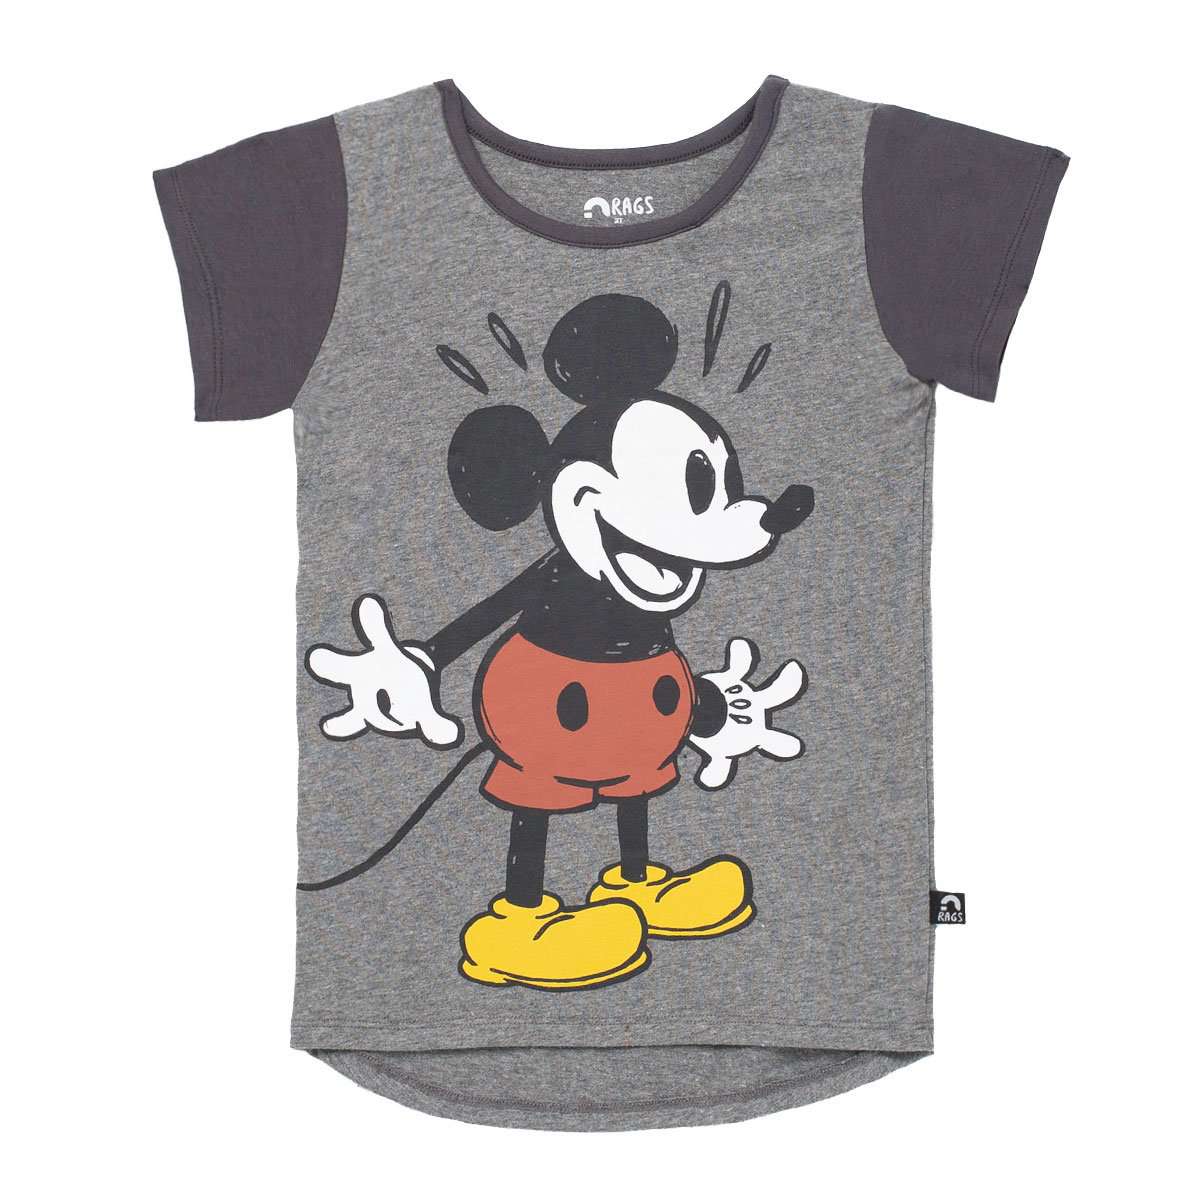 Image of Kids OG Style Tee - 'Vintage Mickey' - Disney Collection from RAGS